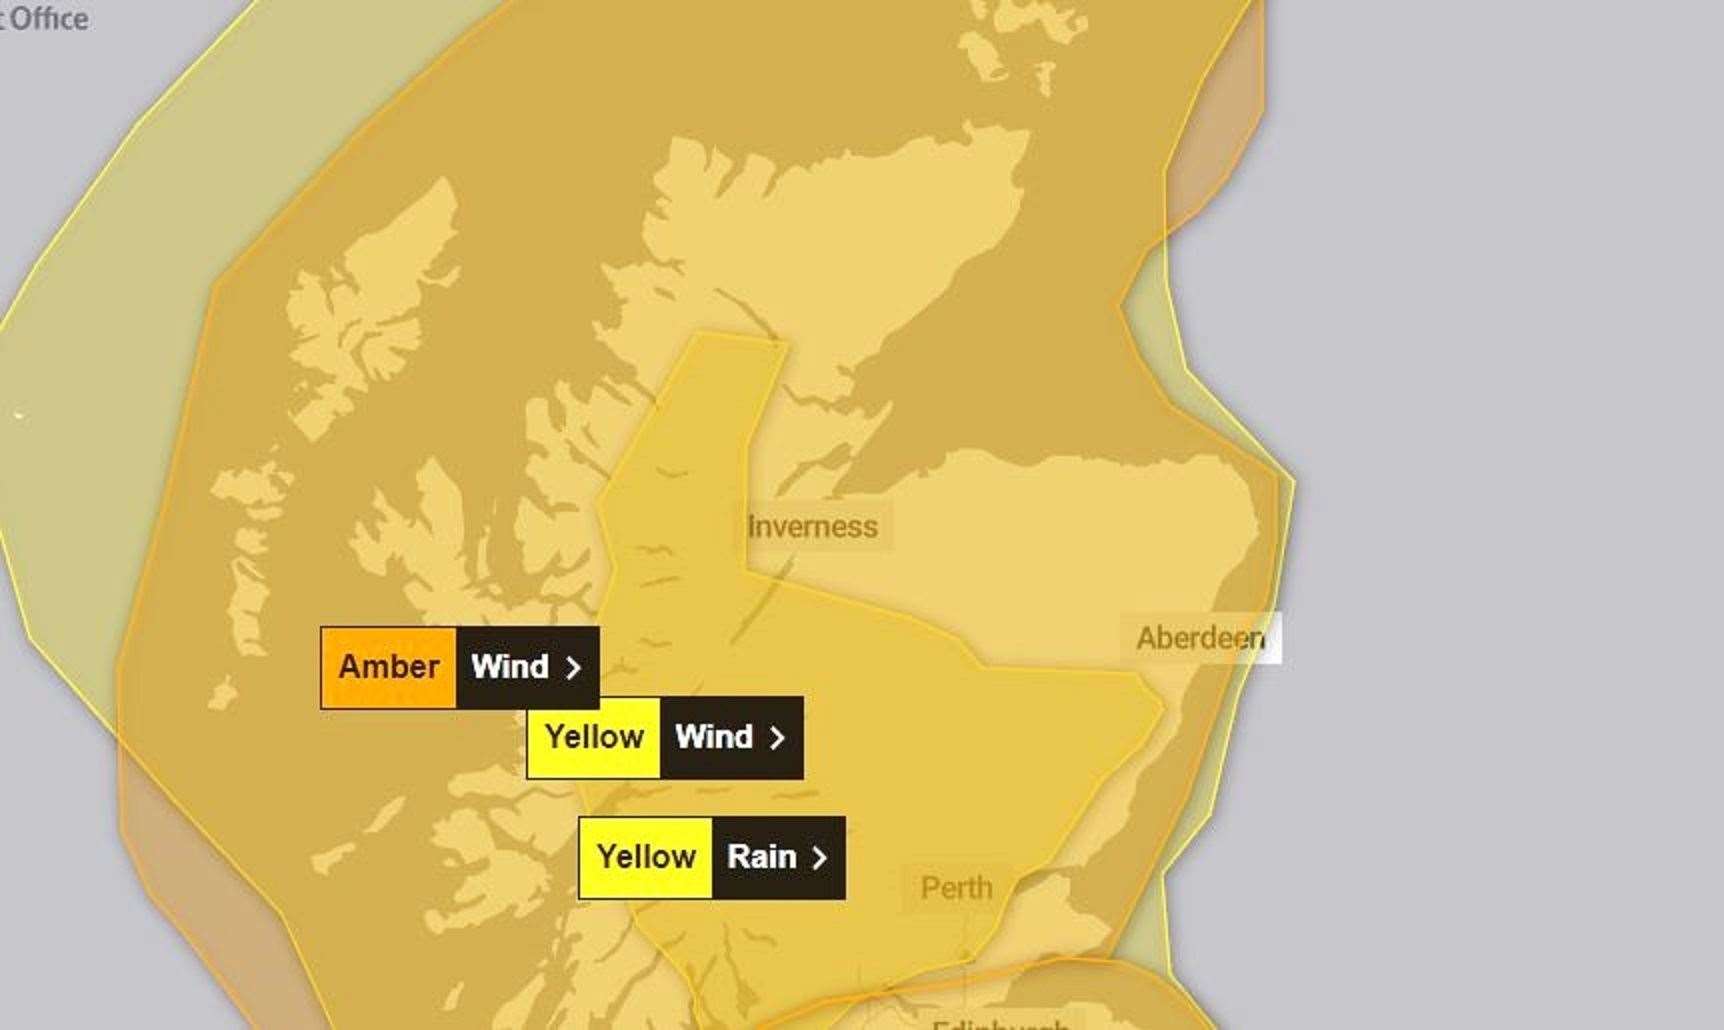 Amber Warning for high winds.